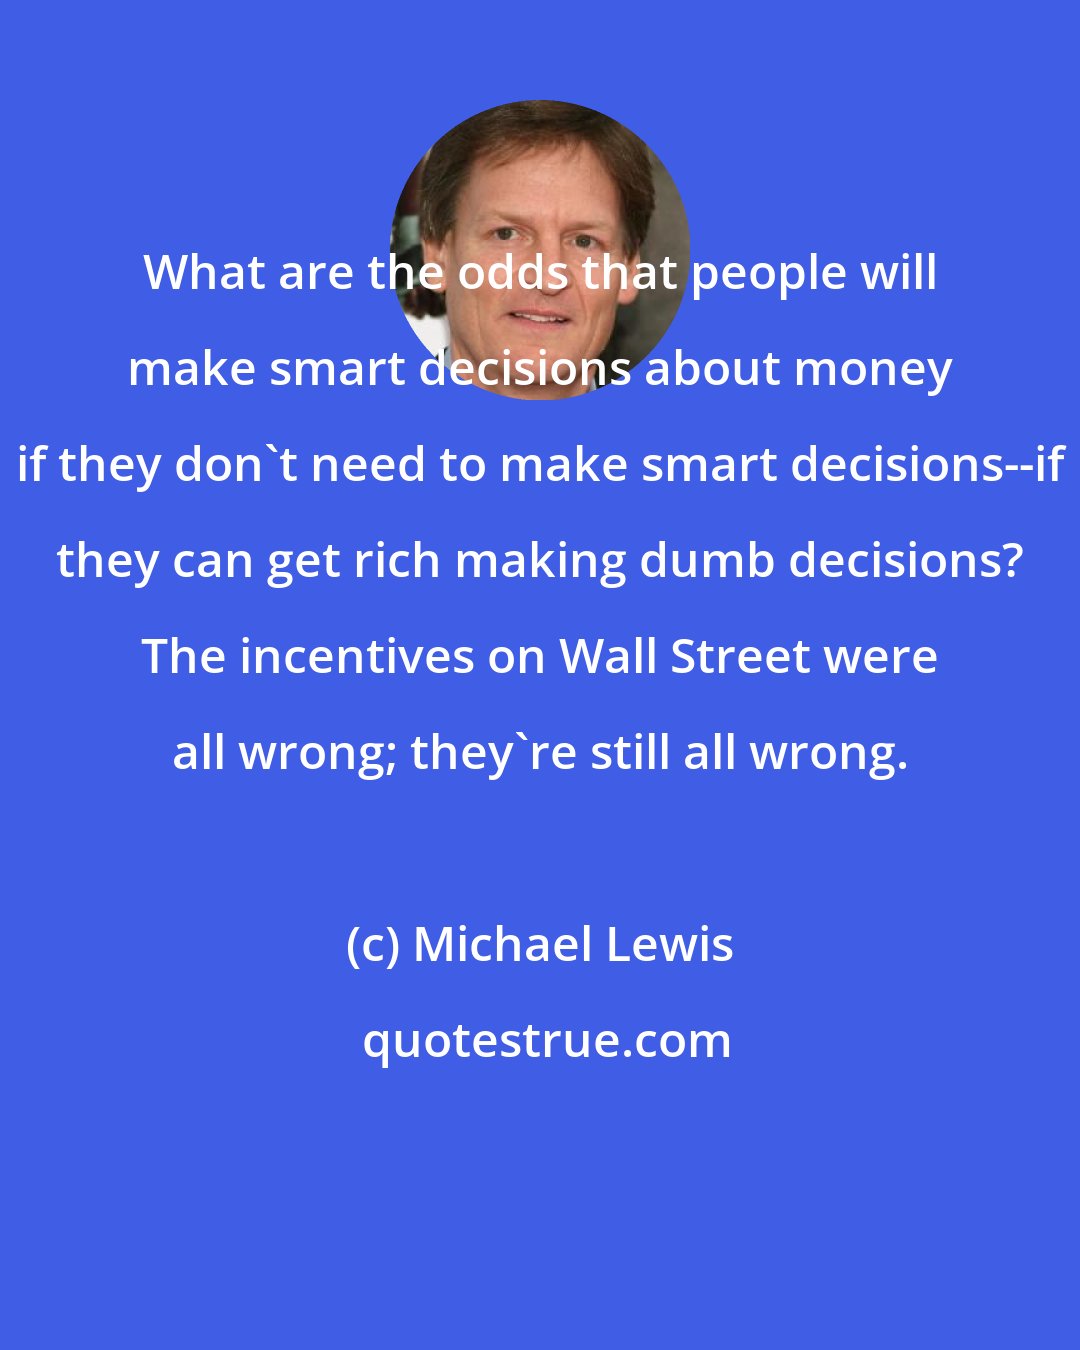 Michael Lewis: What are the odds that people will make smart decisions about money if they don't need to make smart decisions--if they can get rich making dumb decisions? The incentives on Wall Street were all wrong; they're still all wrong.